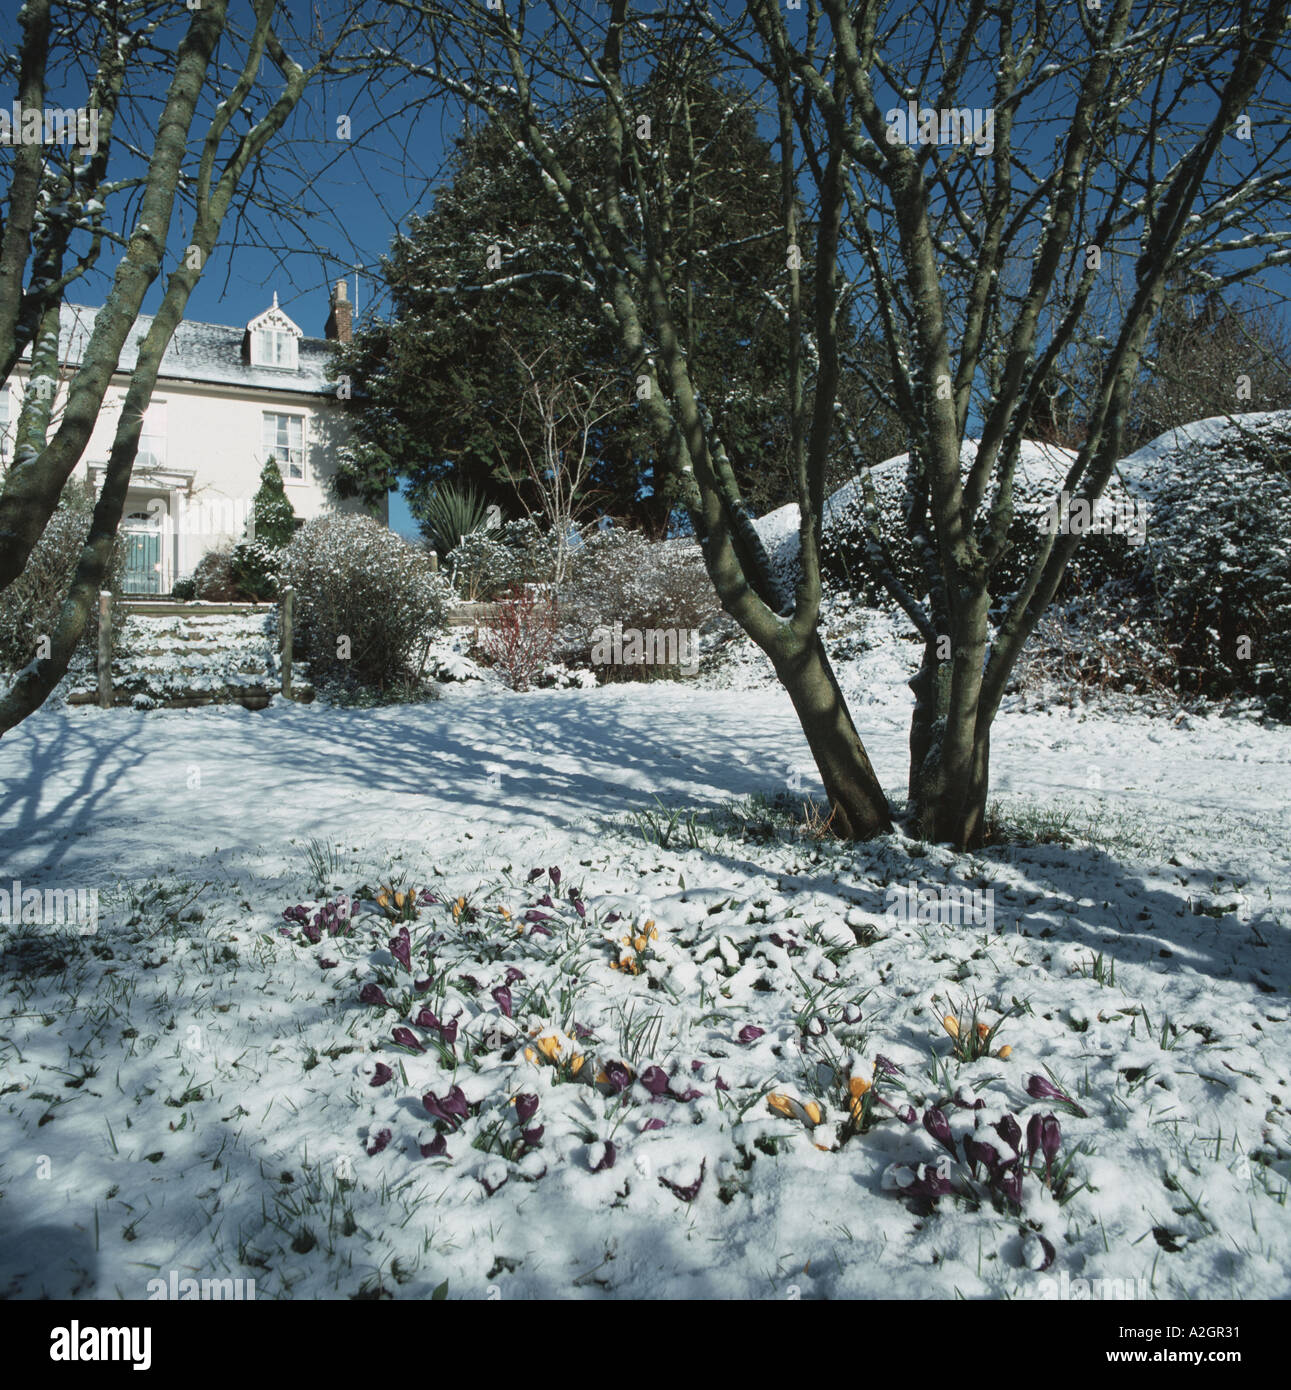 Crocuses covered with light snow in a Devon garden in winter Shadows and bright cold sunshine light the house lawn and trees Stock Photo